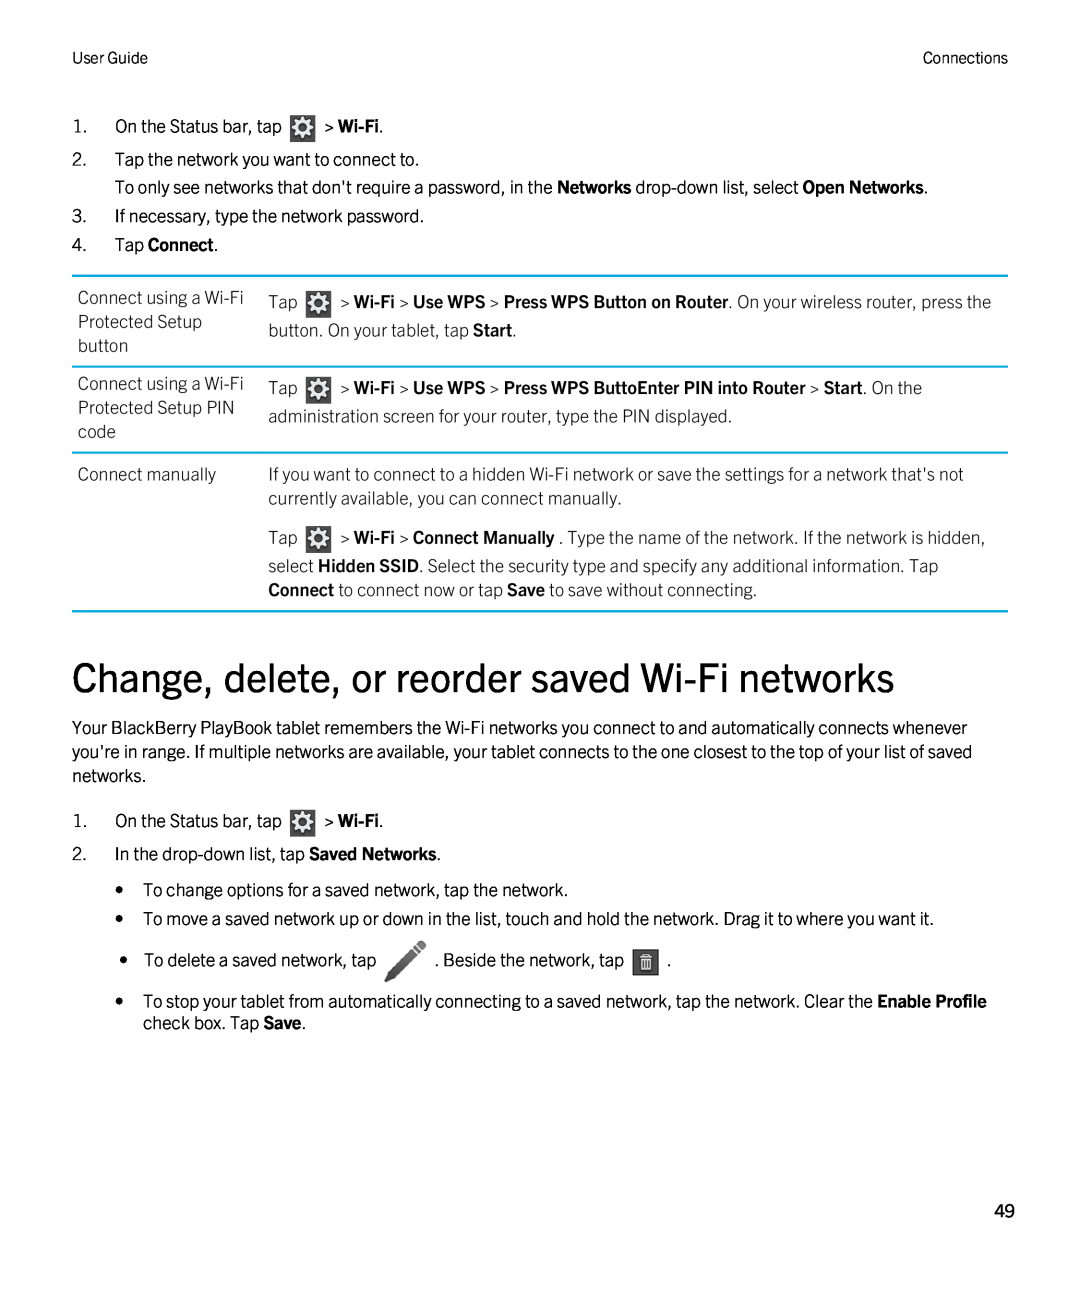 Blackberry 2.0.1 manual Change, delete, or reorder saved Wi-Fi networks, Tap Connect 